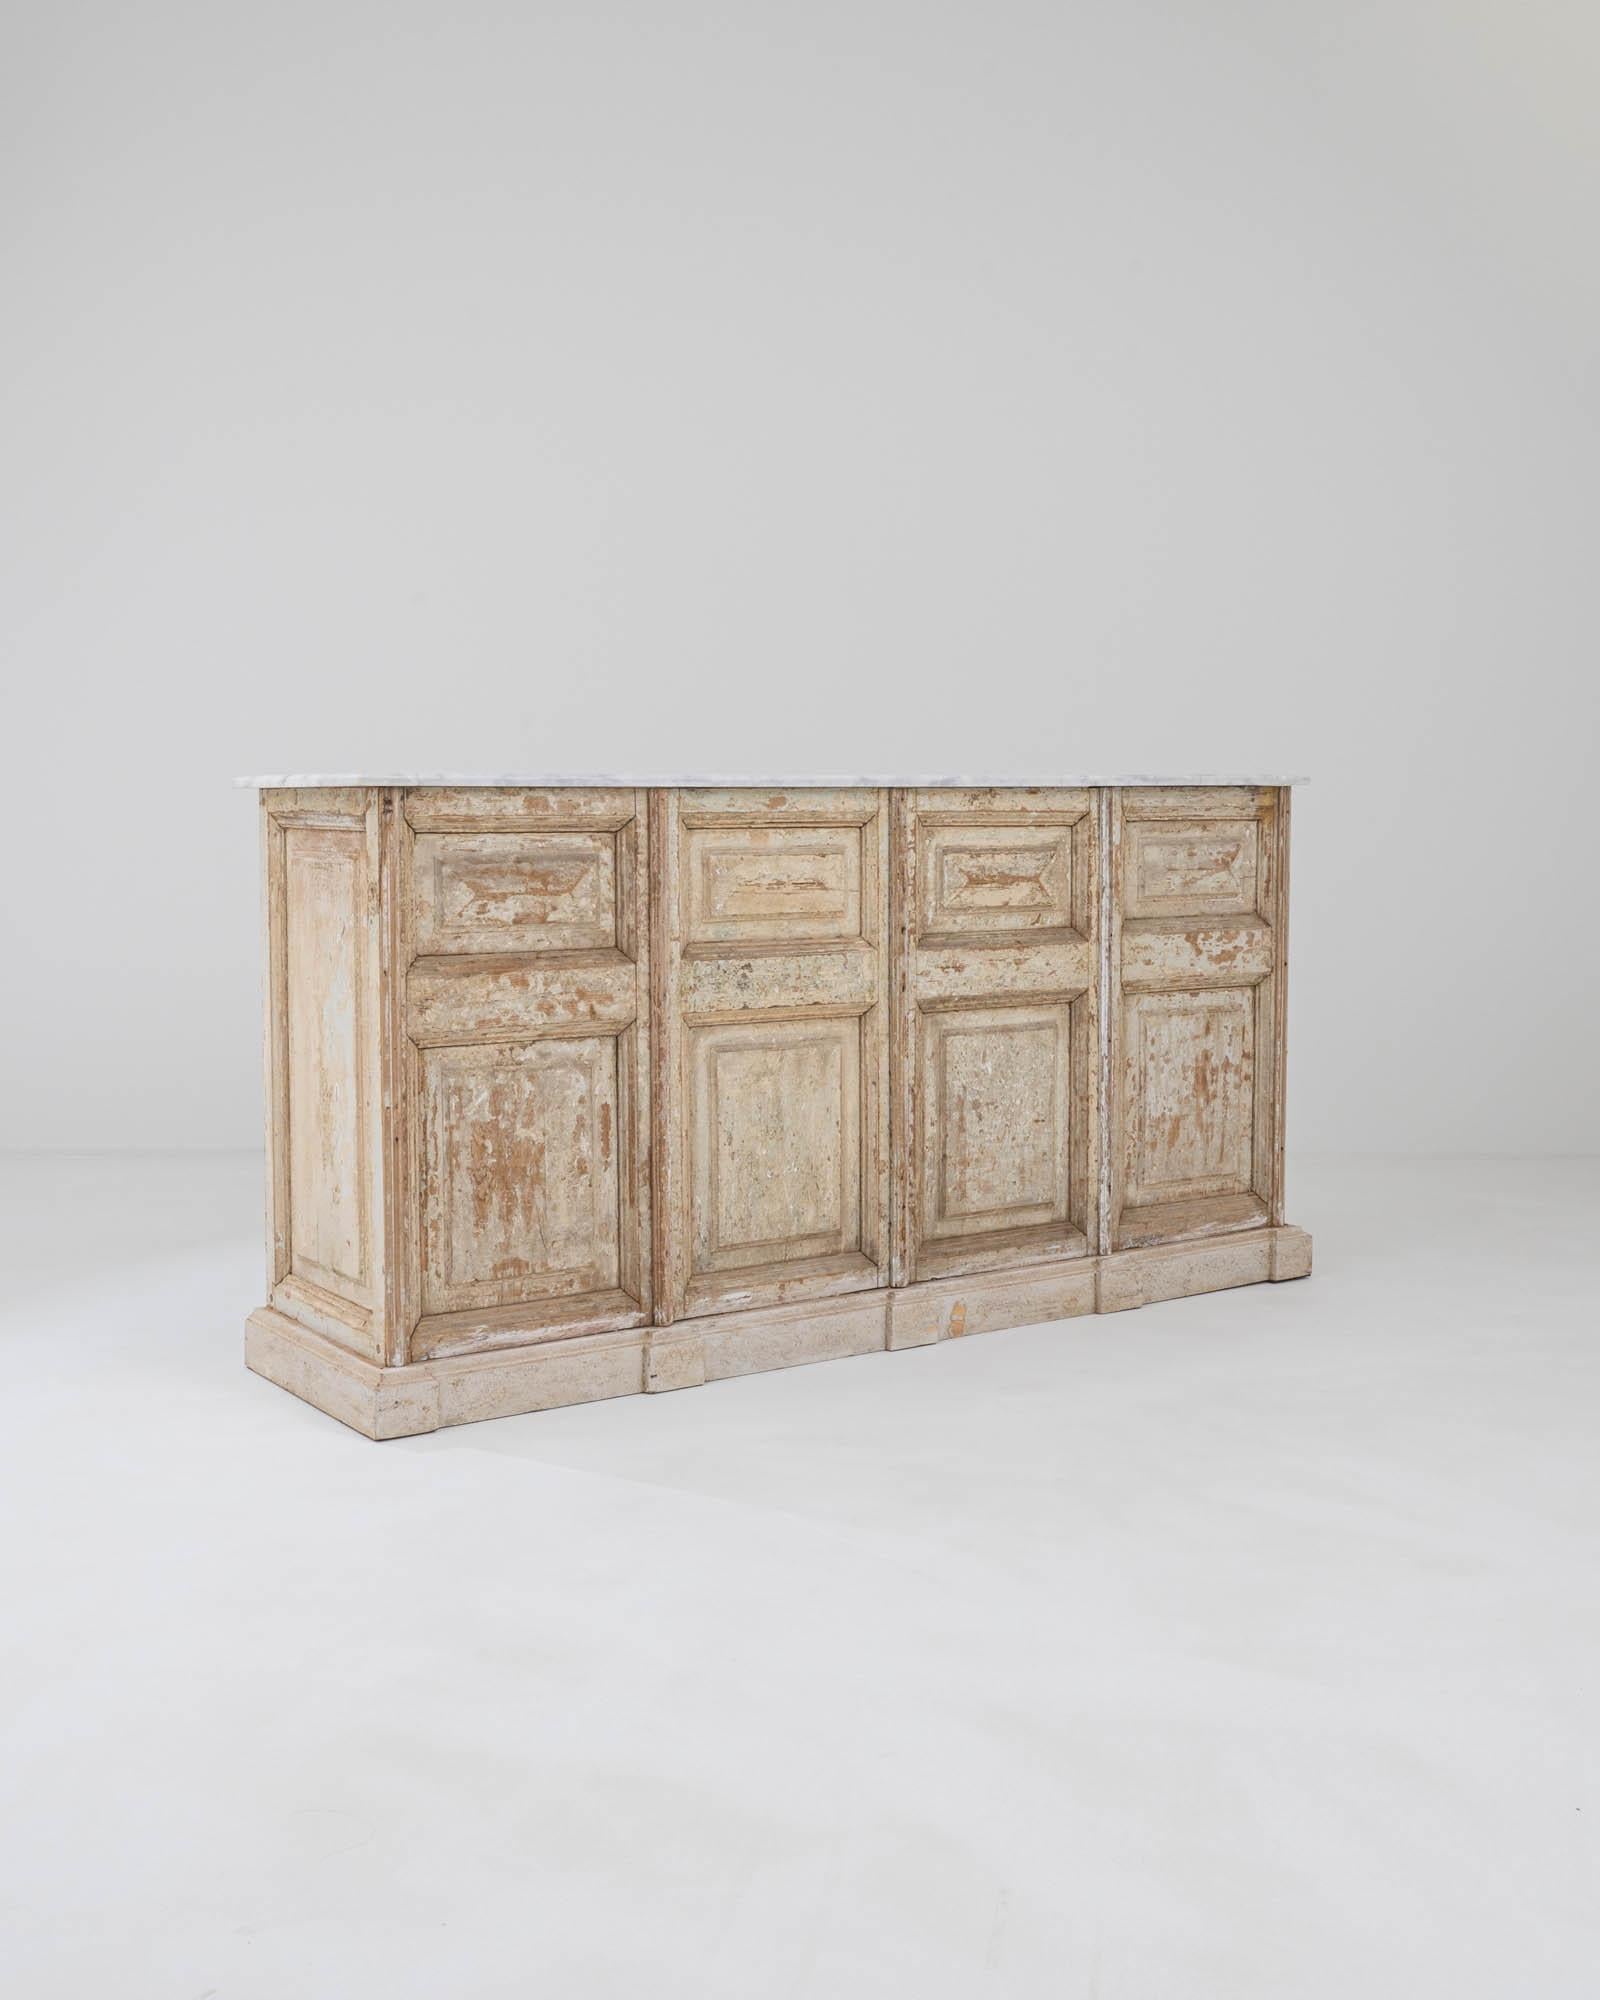 Sourced in Northern Africa, this striking patinated bar was constructed by artisans from vintage wooden doors. Formerly serving as entryways and passages in the imposing palatial townhomes where these paneled doors were once commonplace. The